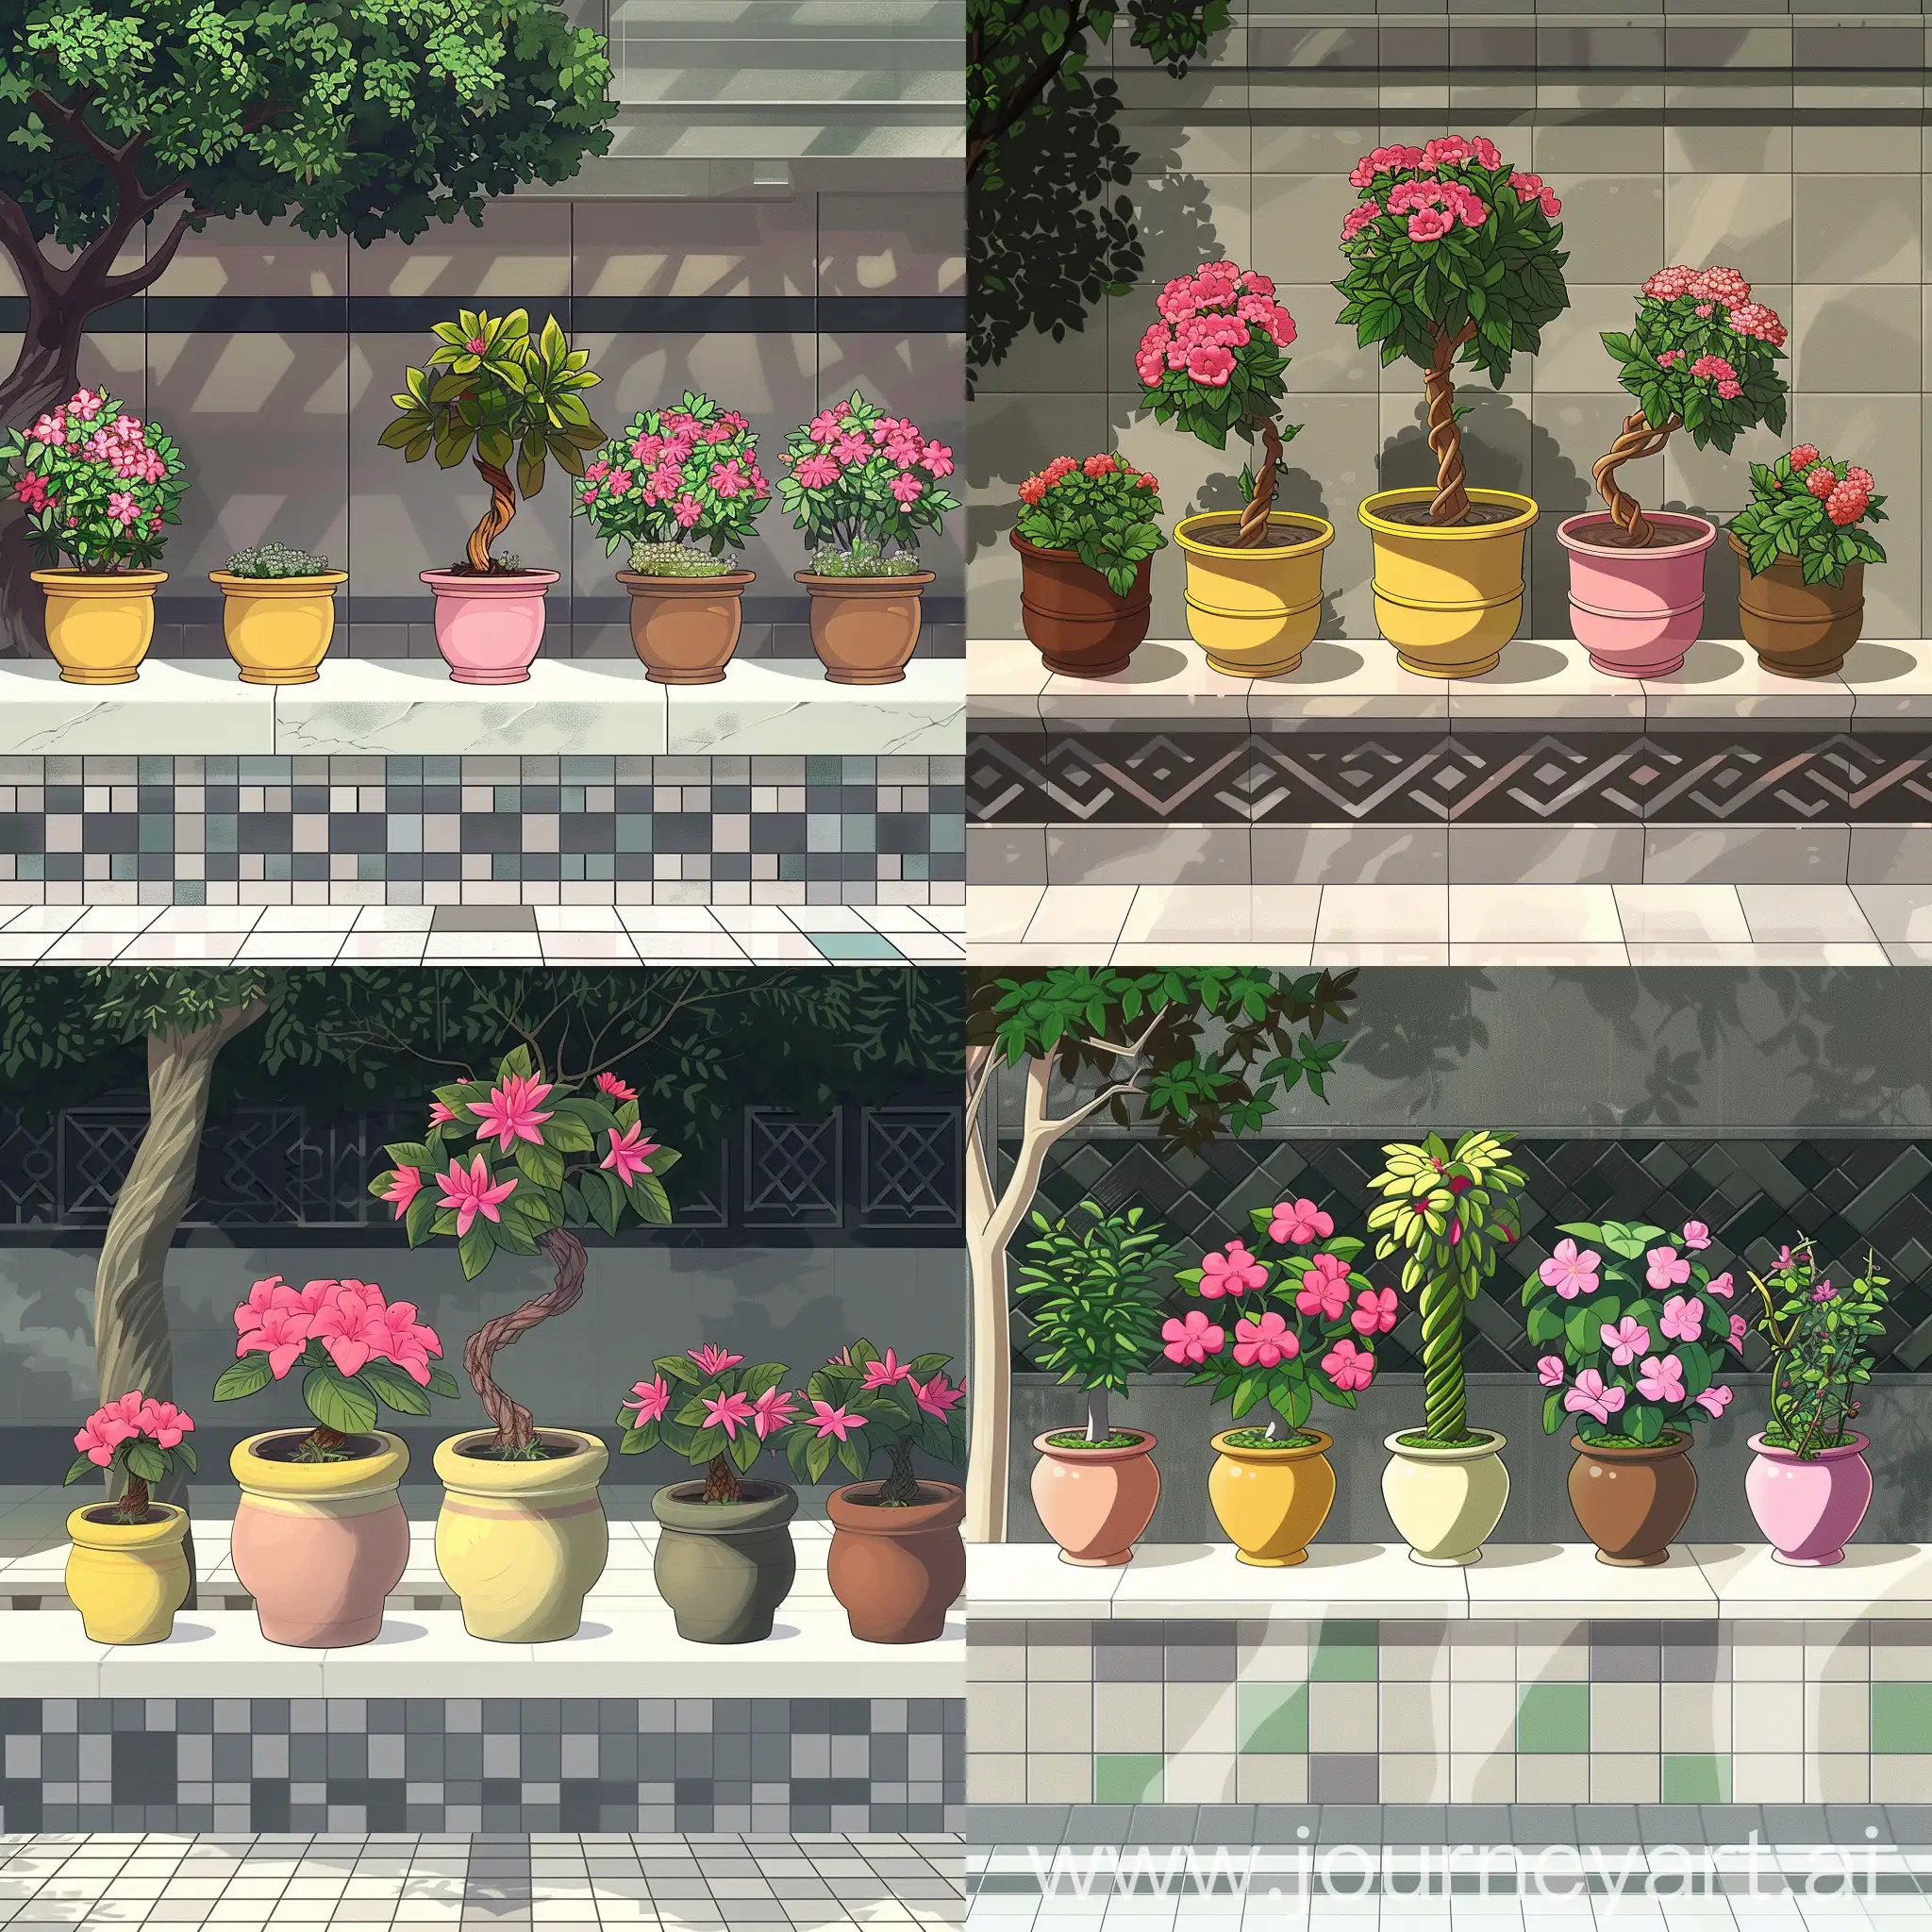 Beautiful anime style,Makoto shinkai style,five potted plants on a white ledge. Here’s a detailed description:  Pots: There are five pots in different colors - yellow, pink, two in brown, and green. Plants: Each pot contains a plant with vibrant pink flowers, except for the central one, which has green leaves and a visibly twisted stem. Background: Below the ledge, there’s a grey and black patterned section, and the floor is tiled with white squares outlined in grey. It seems like a well-arranged display of plants, possibly for decorative purposes or to create a small indoor garden. The twisted stem in the middle pot adds an interesting visual element to the arrangement,a tree to the extreme left side can be seen.